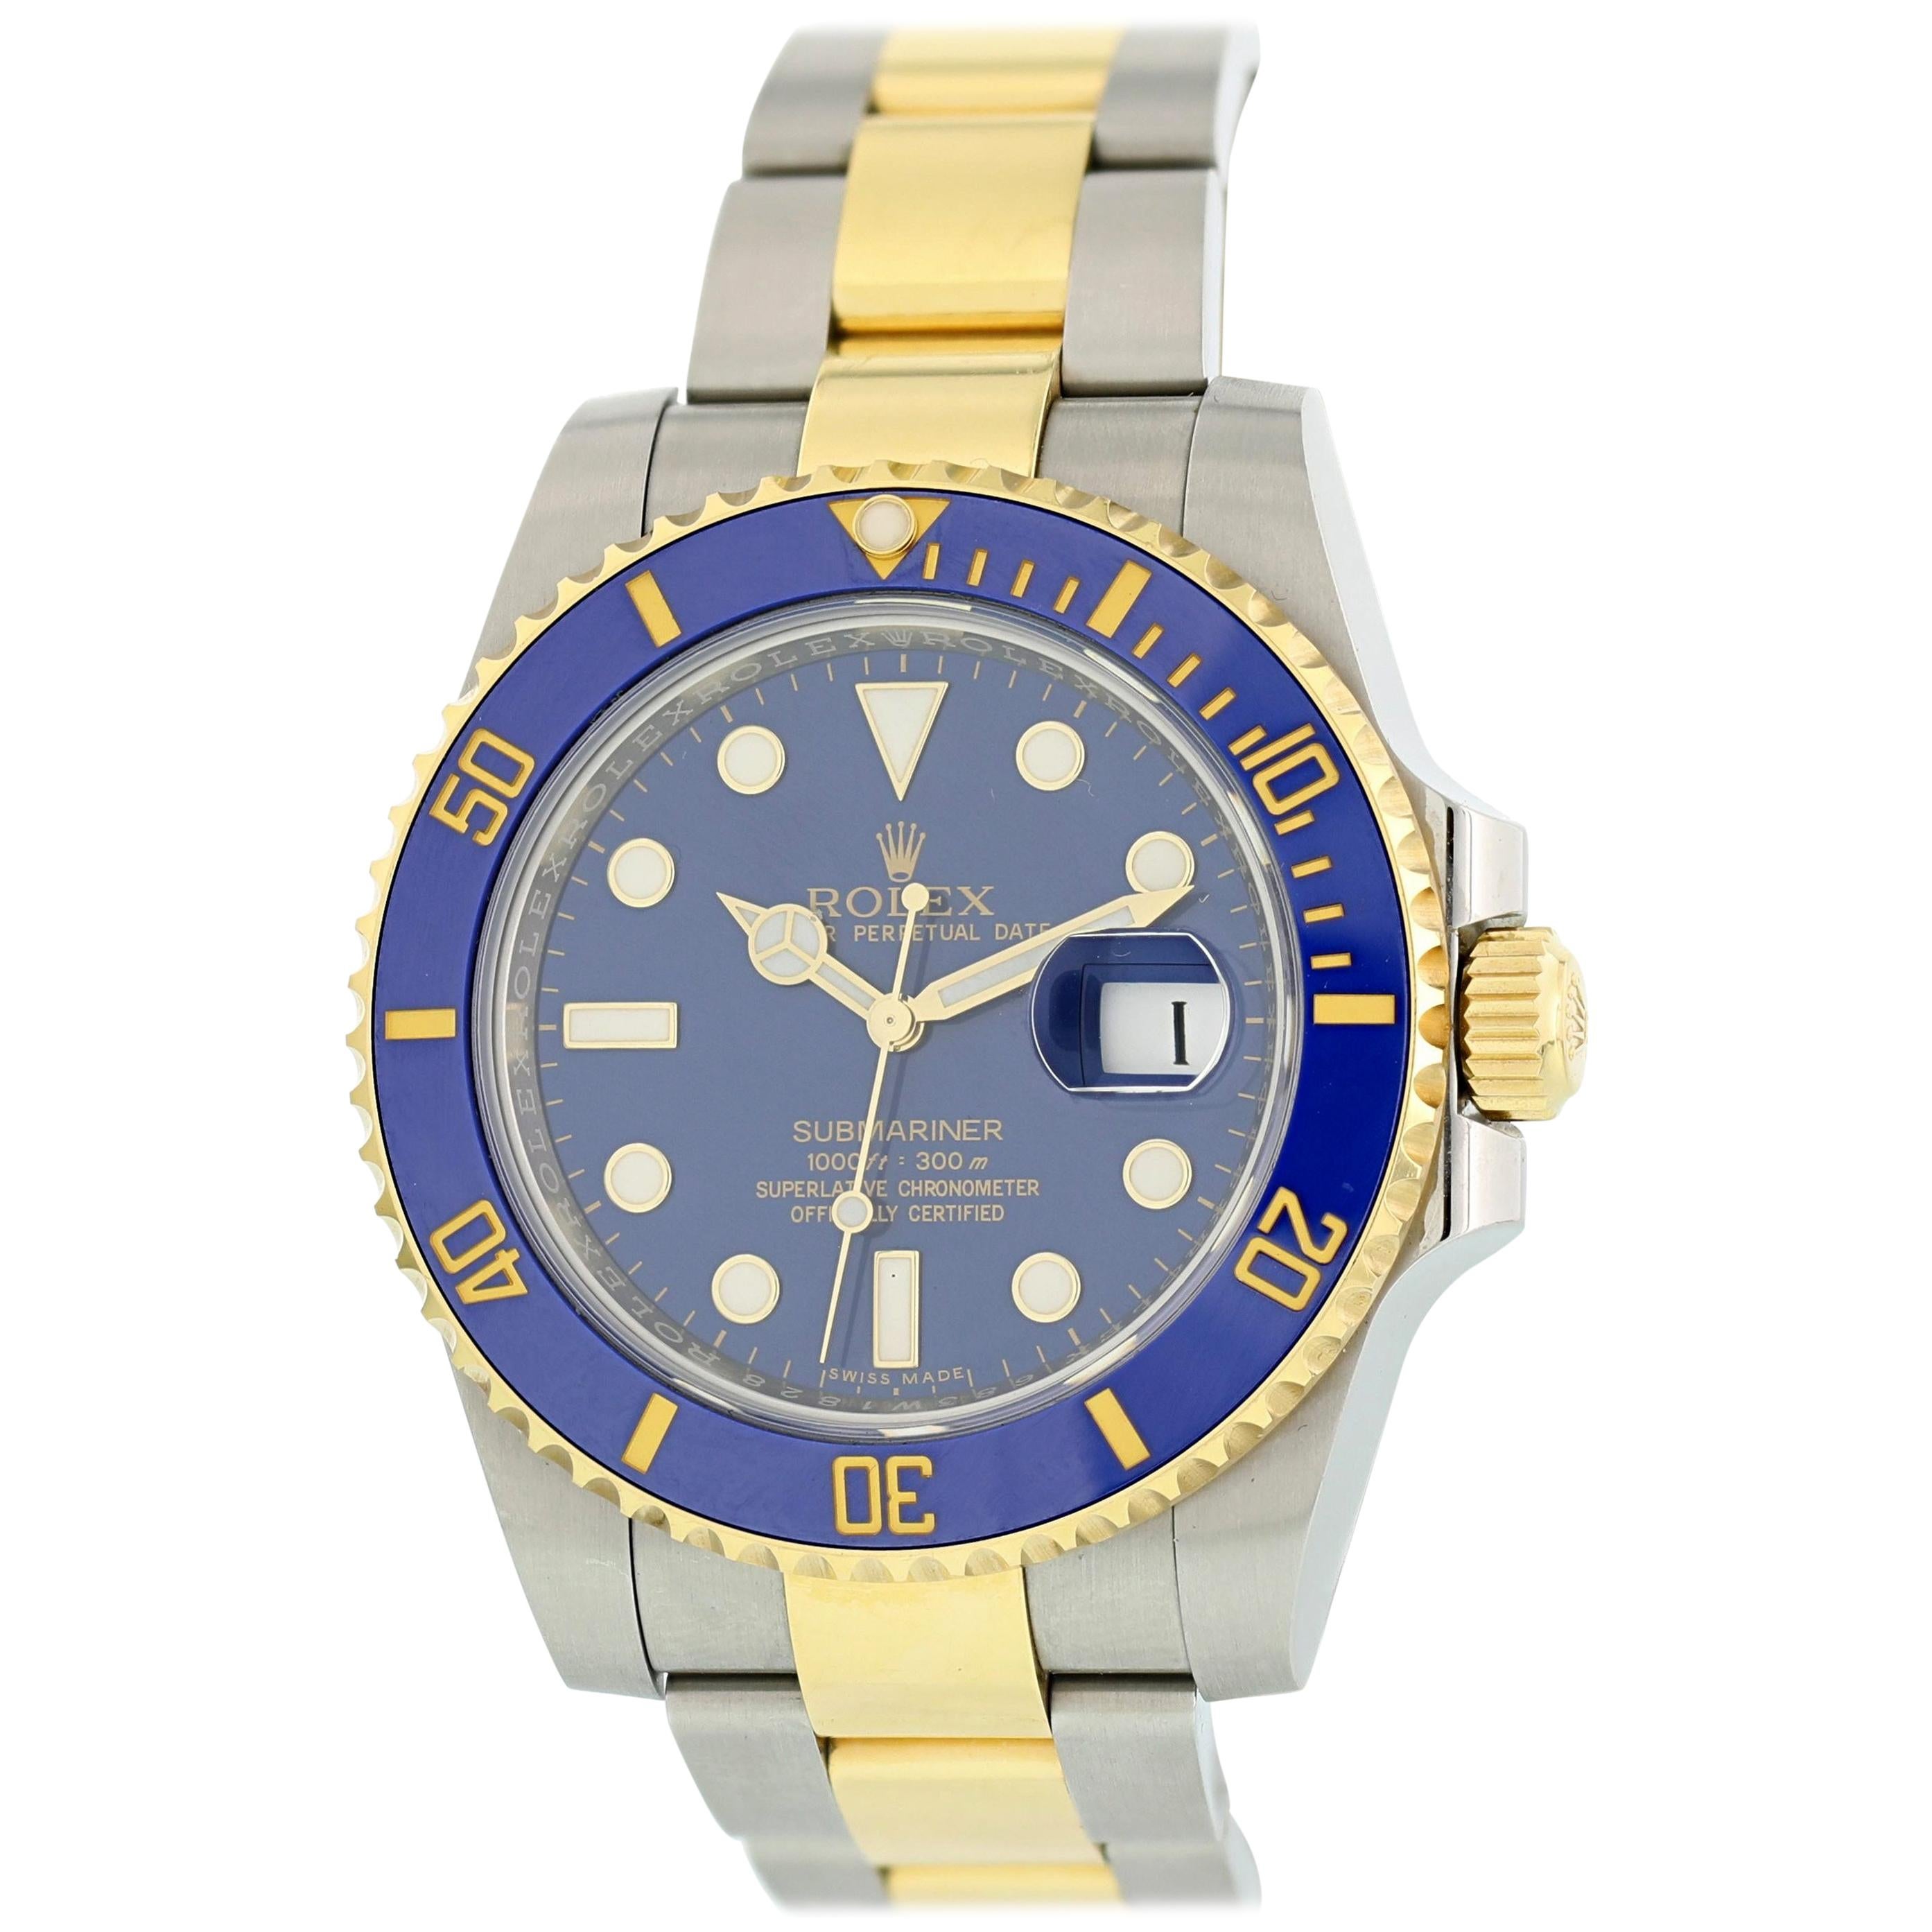 Rolex Submariner 116613 Men's Watch Box Papers For Sale